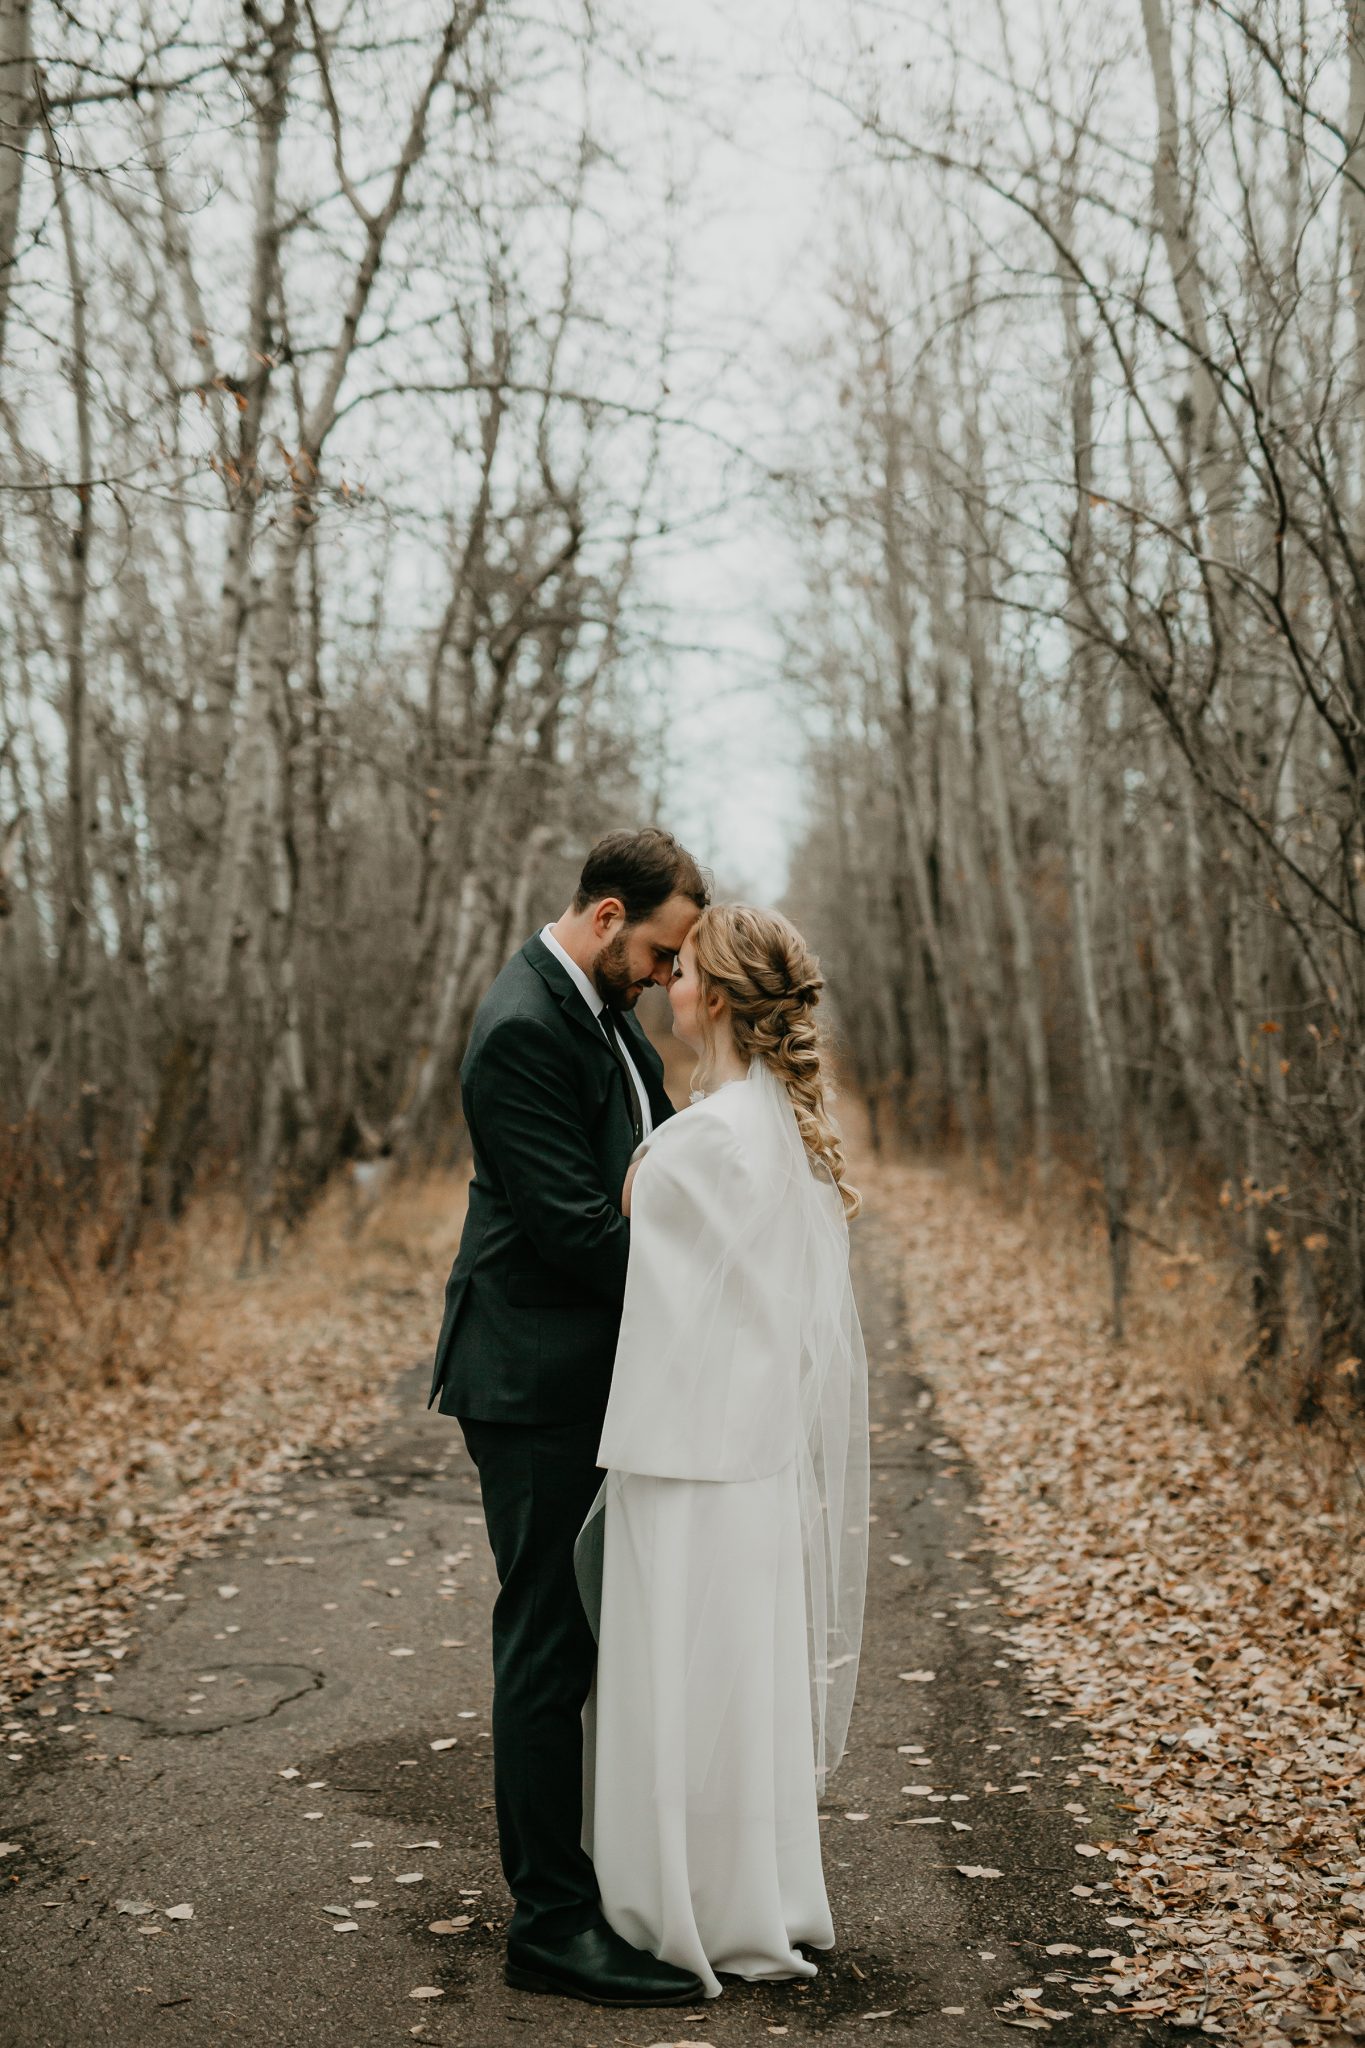 Fall wedding inspiration with a crepe bridal jacket